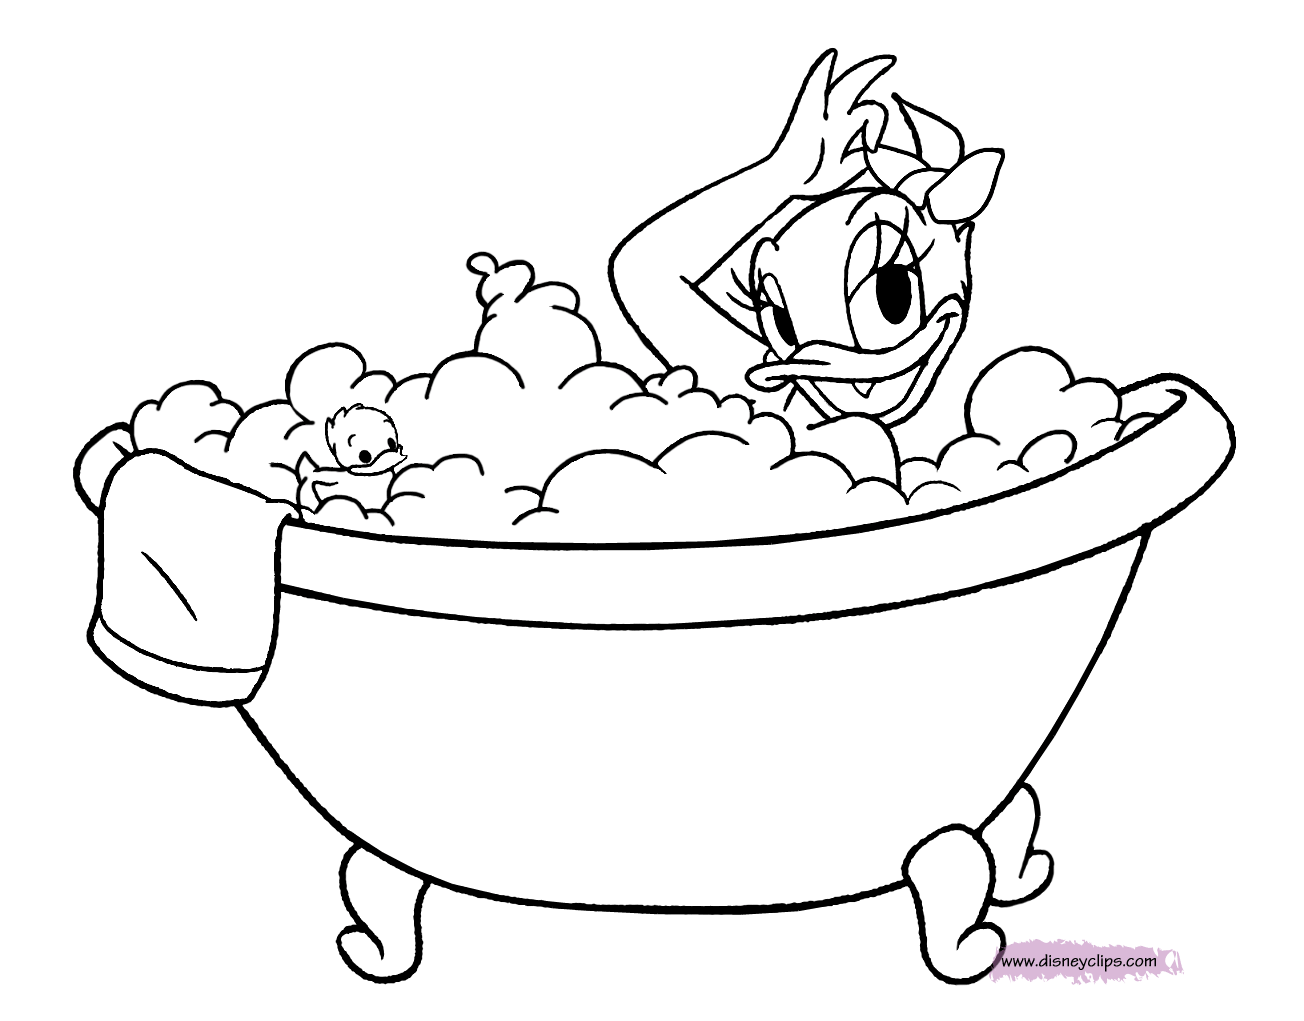 Download Donald and Daisy Duck Coloring Pages 3 | Disney Coloring Book